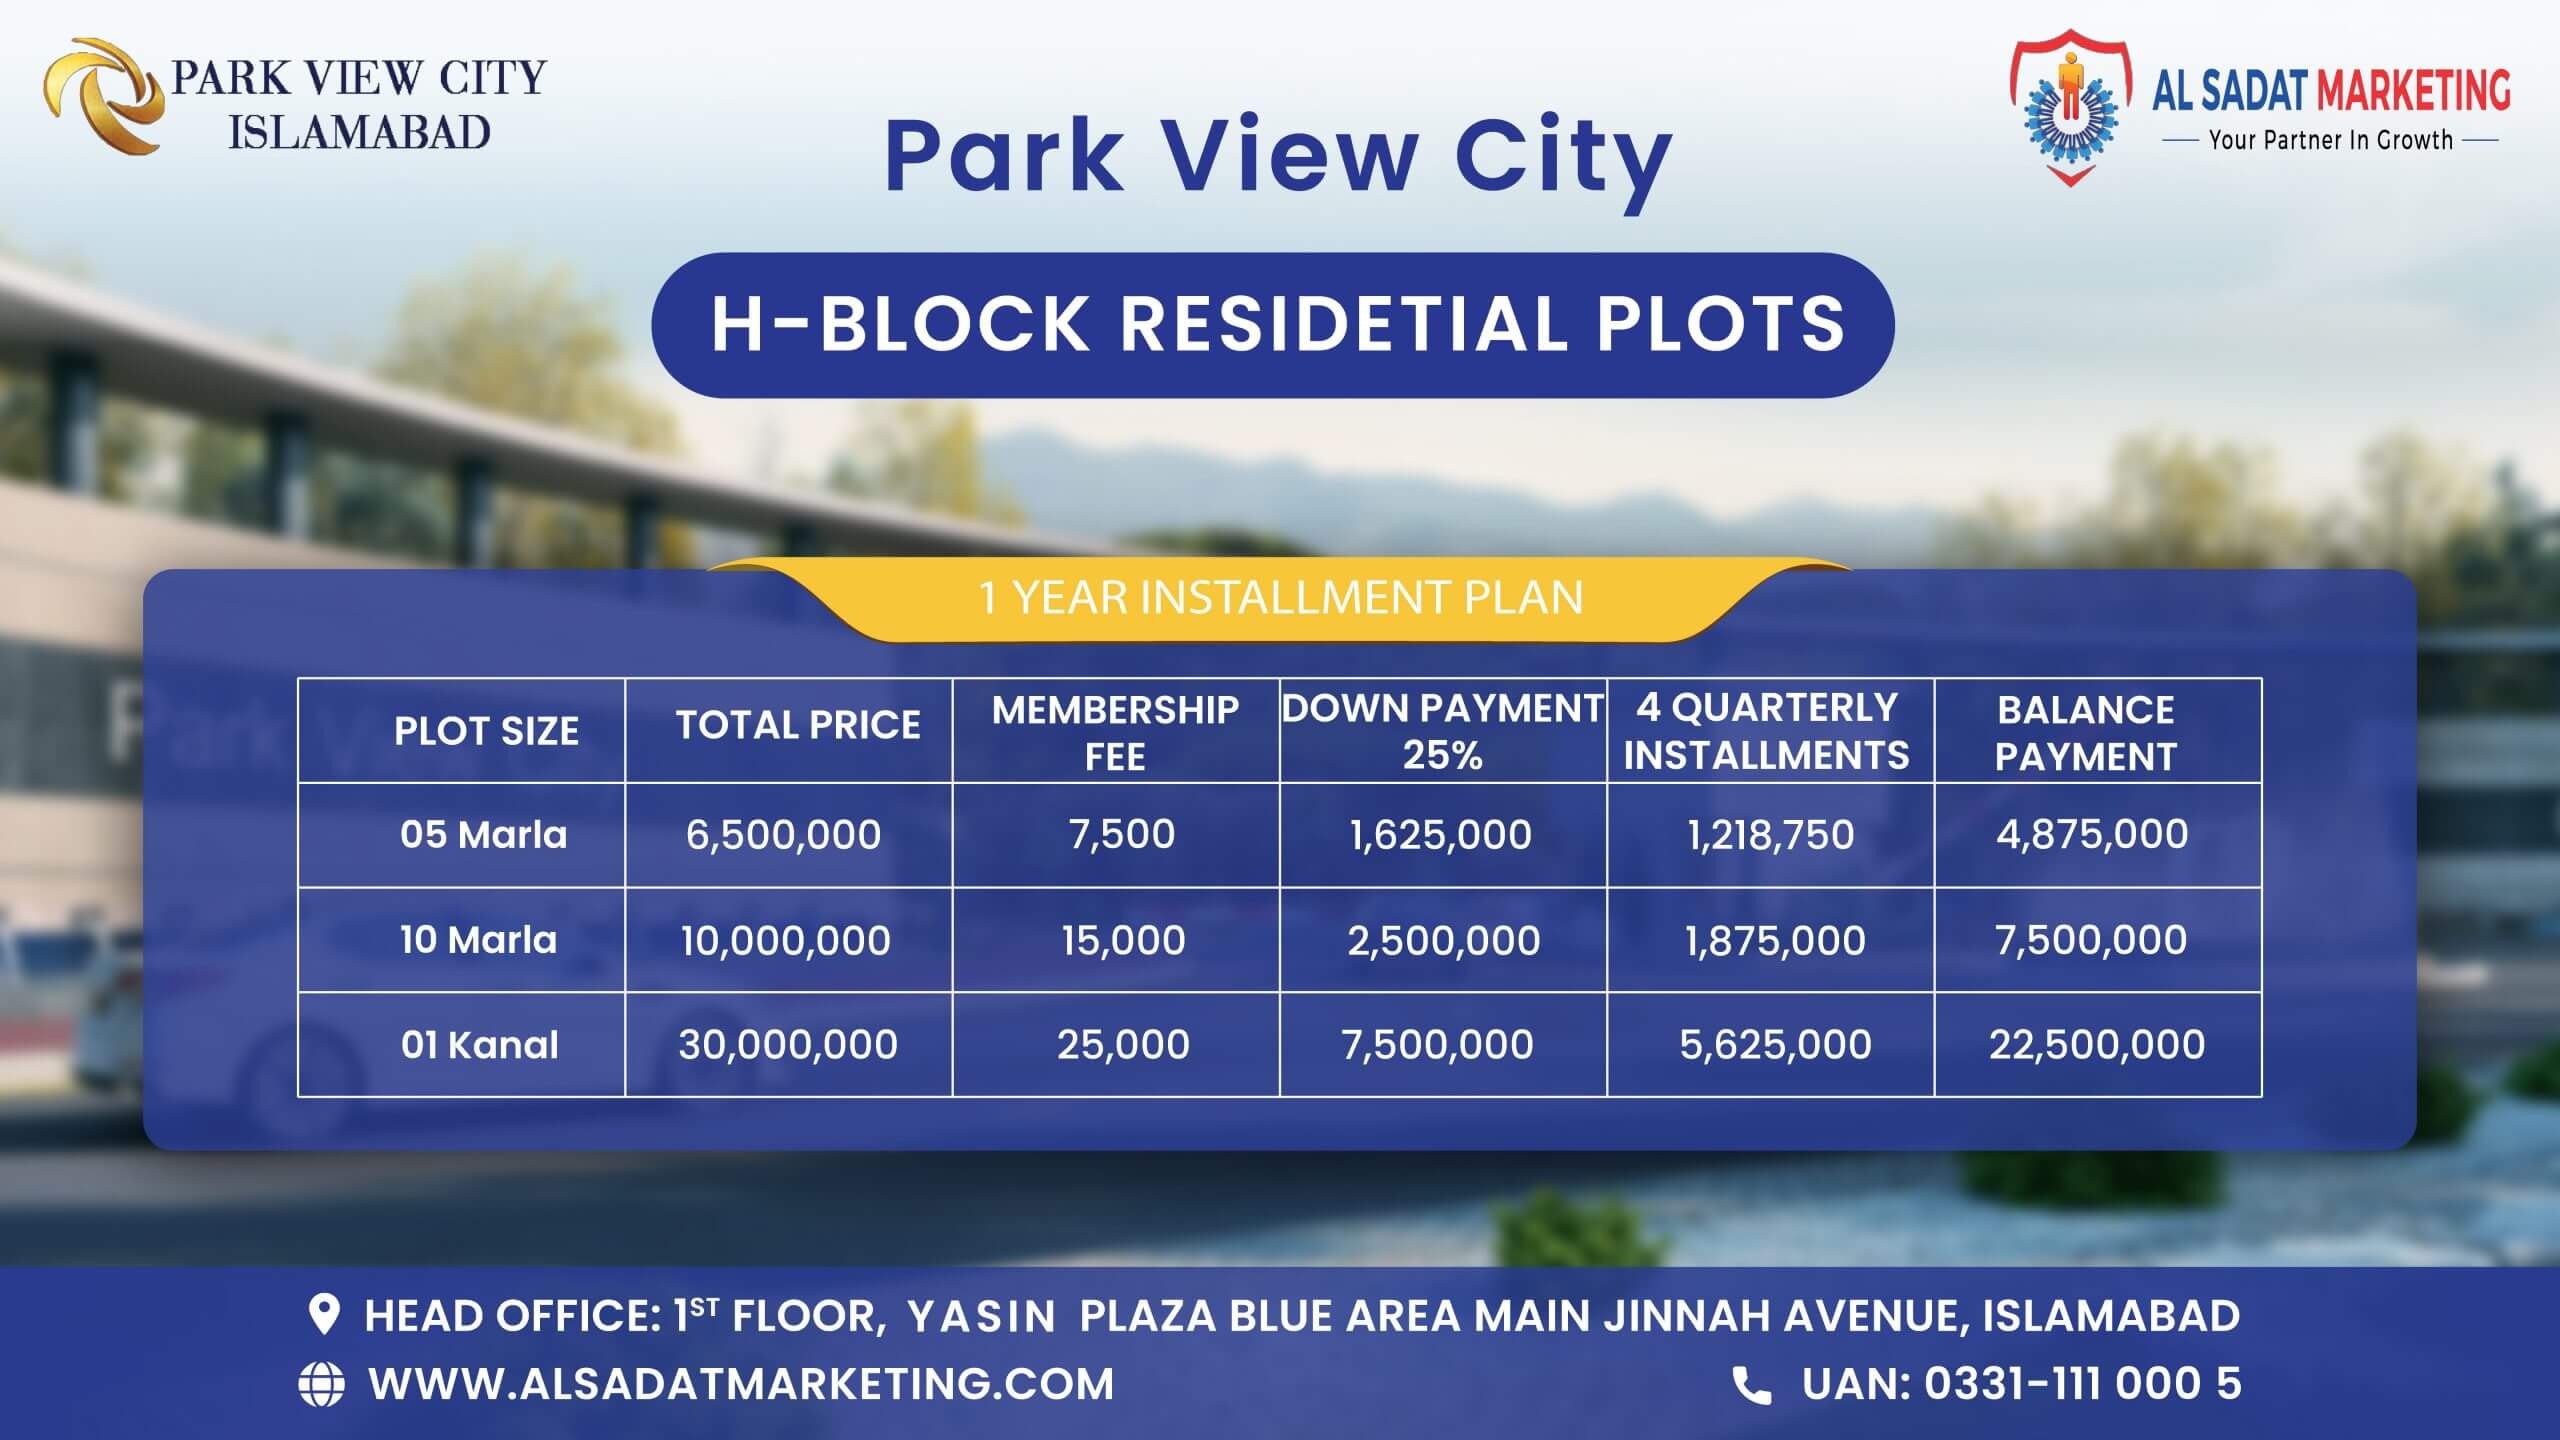 park view city islamabad h block updated payment plan - park view city h block updated payment plan - park view city islamabad h block residential plots updated payment plan - park view city h block residential plots updated payment plan - park view city islamabad payment plan - park view city payment plan - payment plan of park view city islamabad – payment plan of park view city – park view city islamabad – park view city – park view city housing society - park view city islamabad housing society – park view city real estate project - park view city islamabad real estate project - al sadat marketing - alsadat marketing - al-sadat marketing